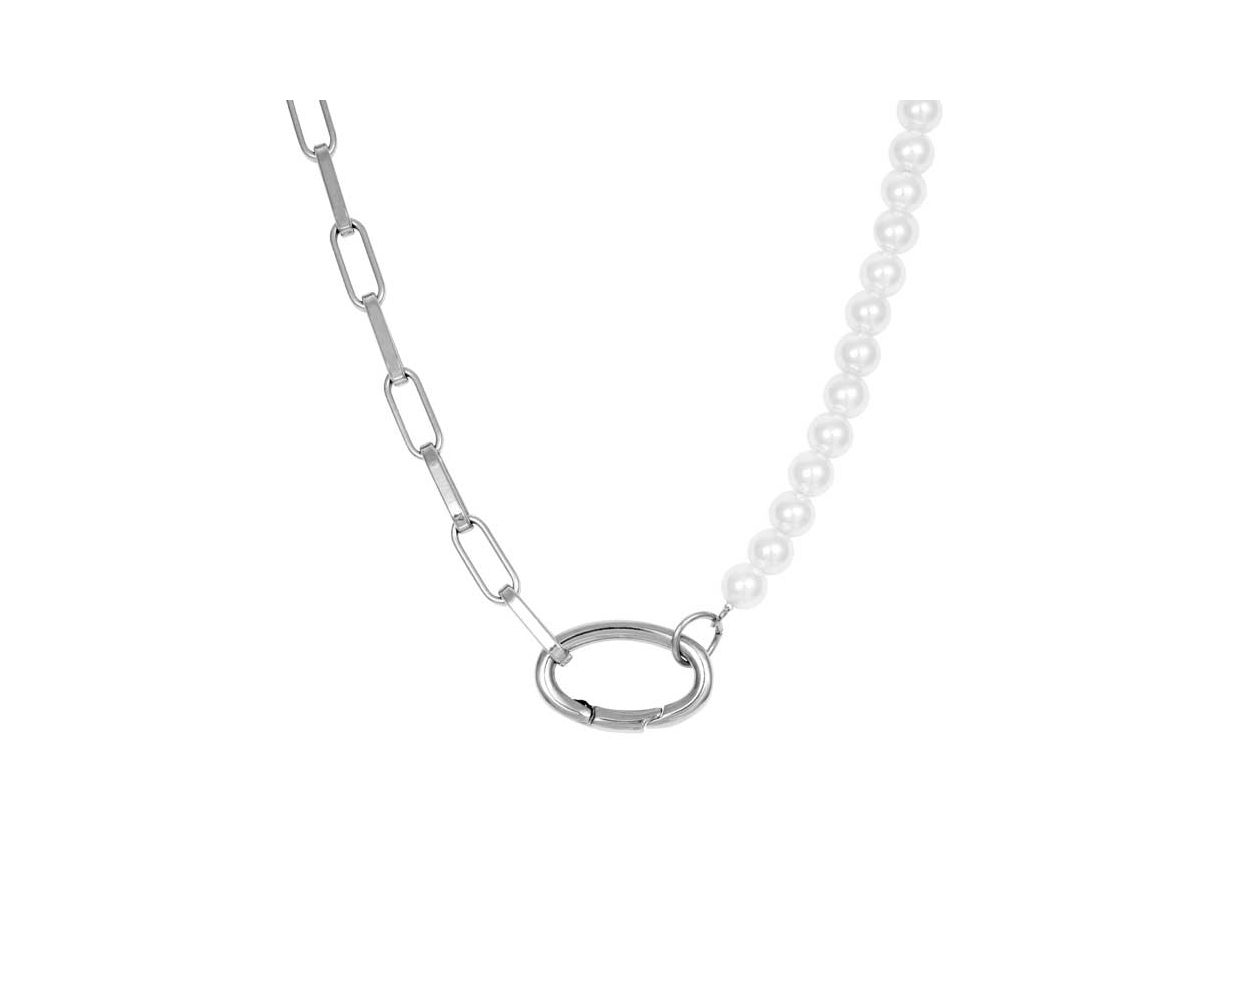 iXXXi Collier Square Chain Pearl - N04602